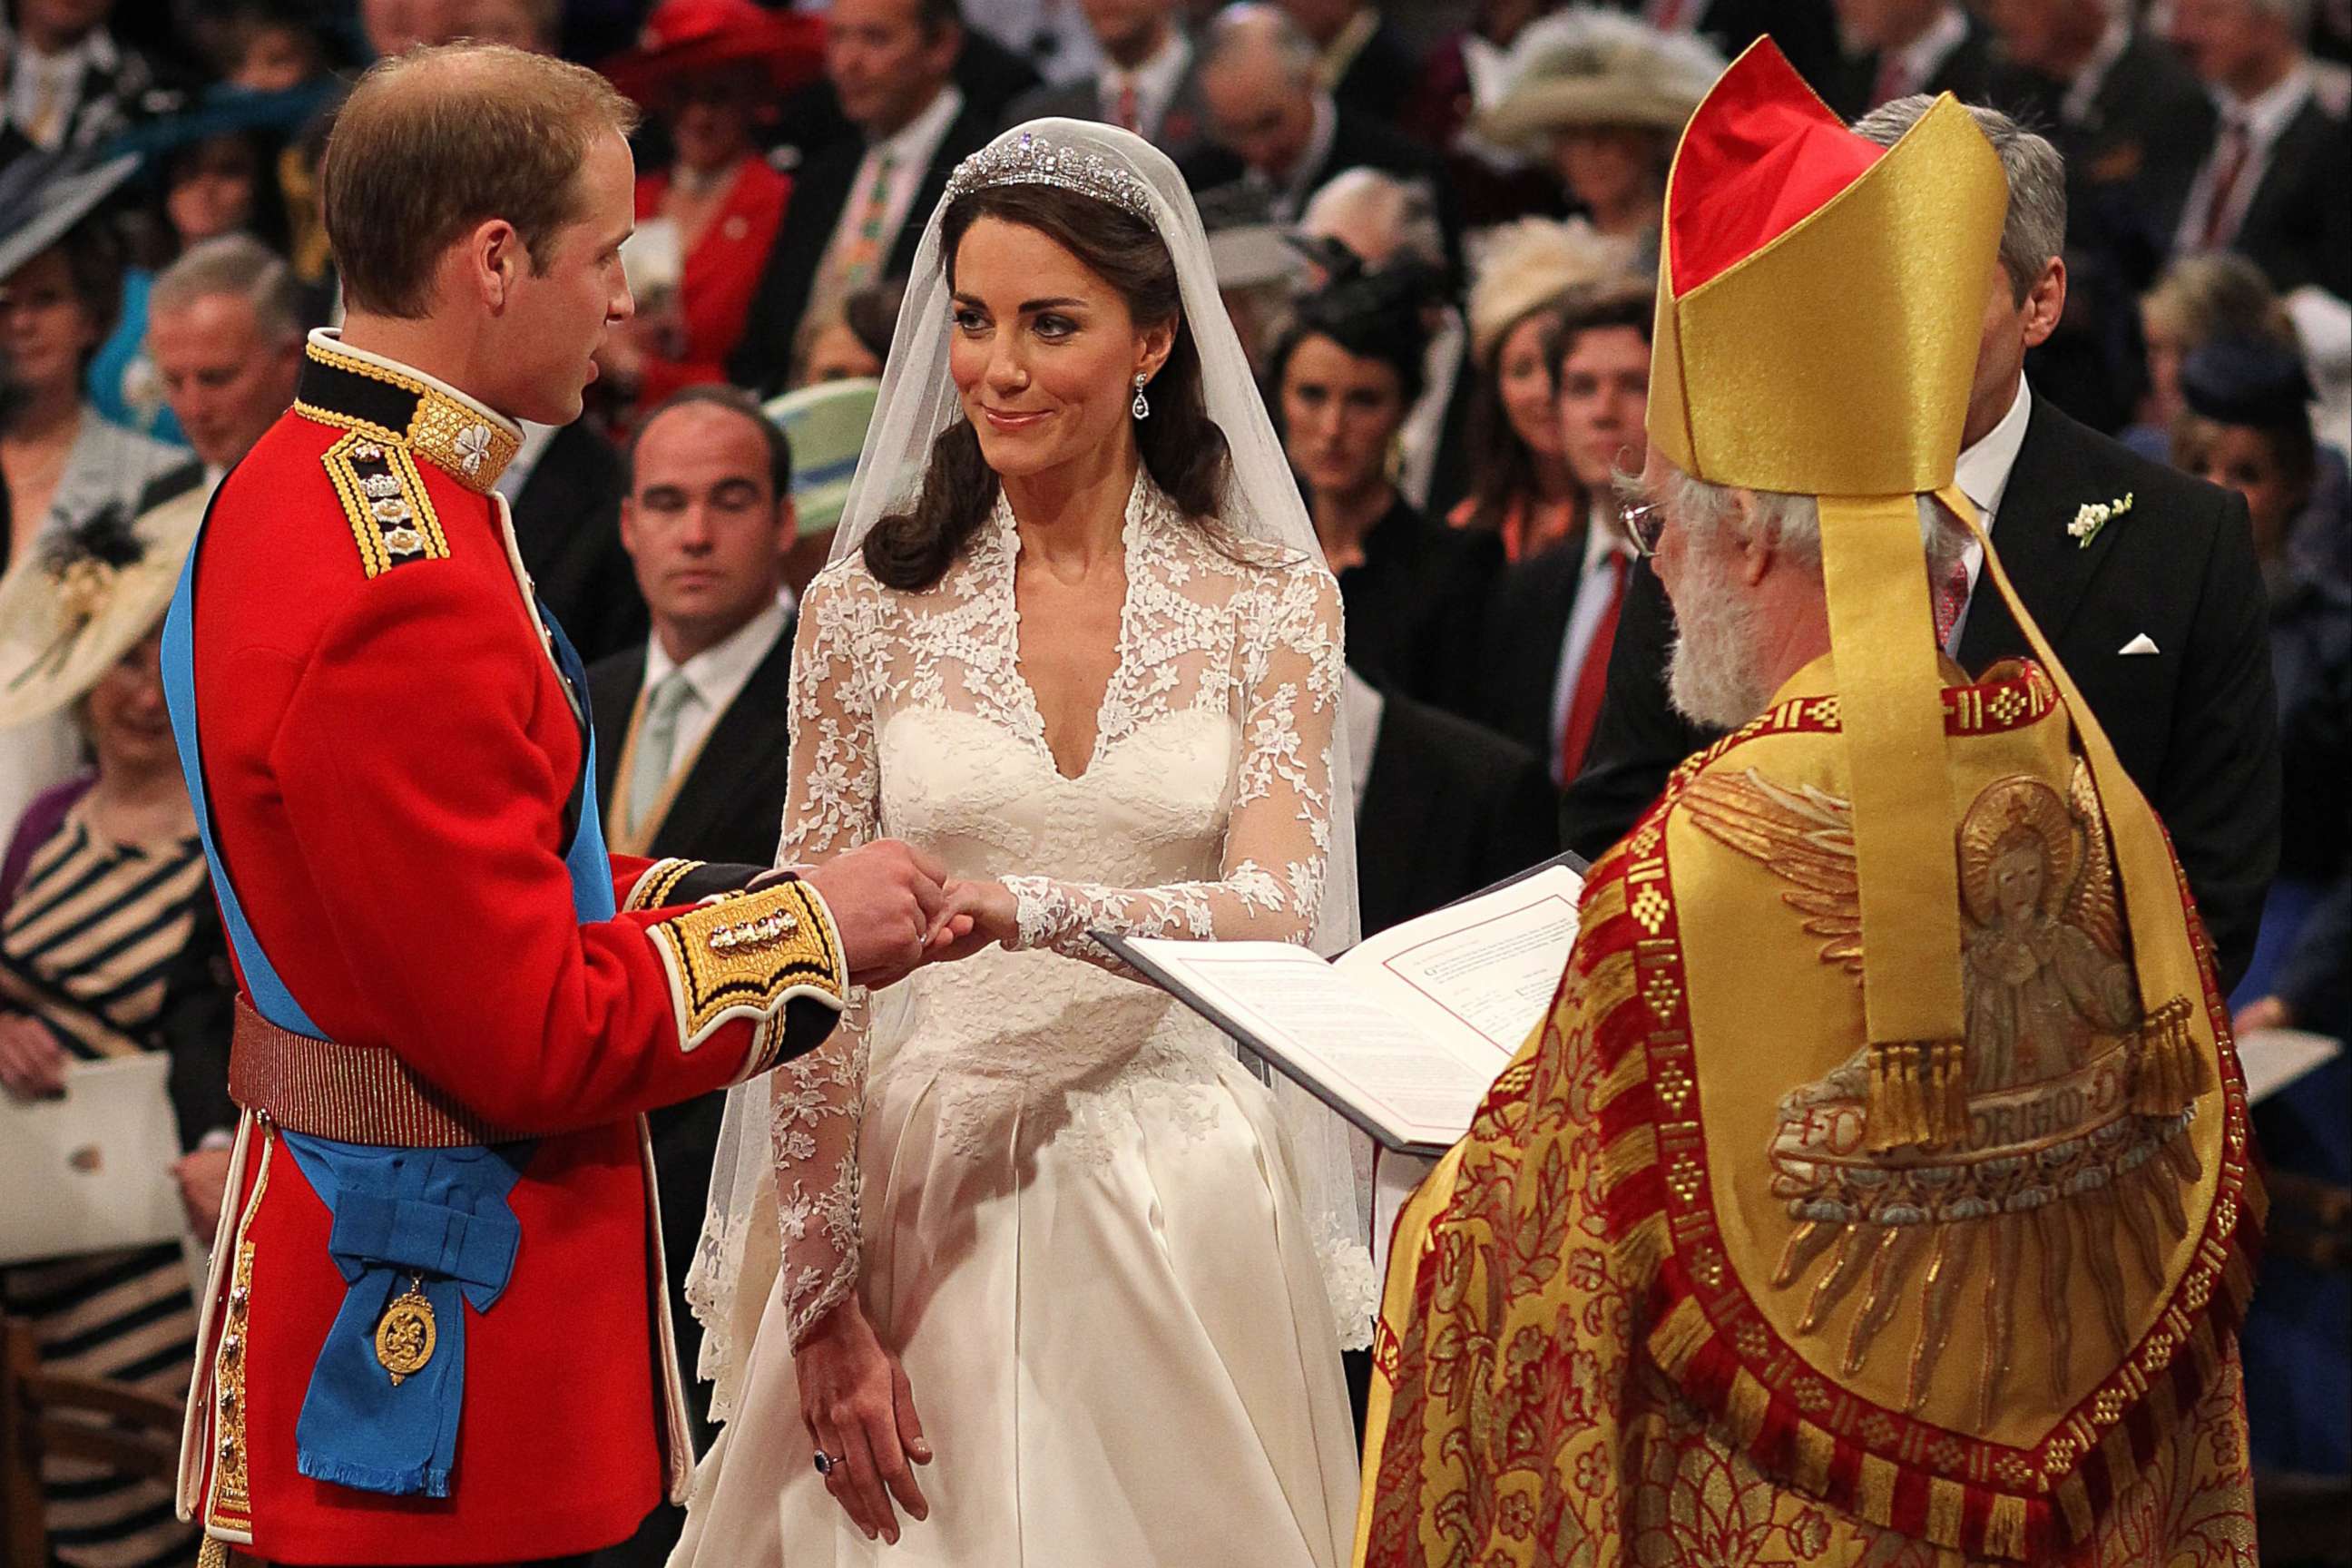 PHOTO: Britain's Prince William and Kate Middleton exchange rings in front of the Archbishop of Canterbury at Westminster Abbey, London, April 29, 2011.